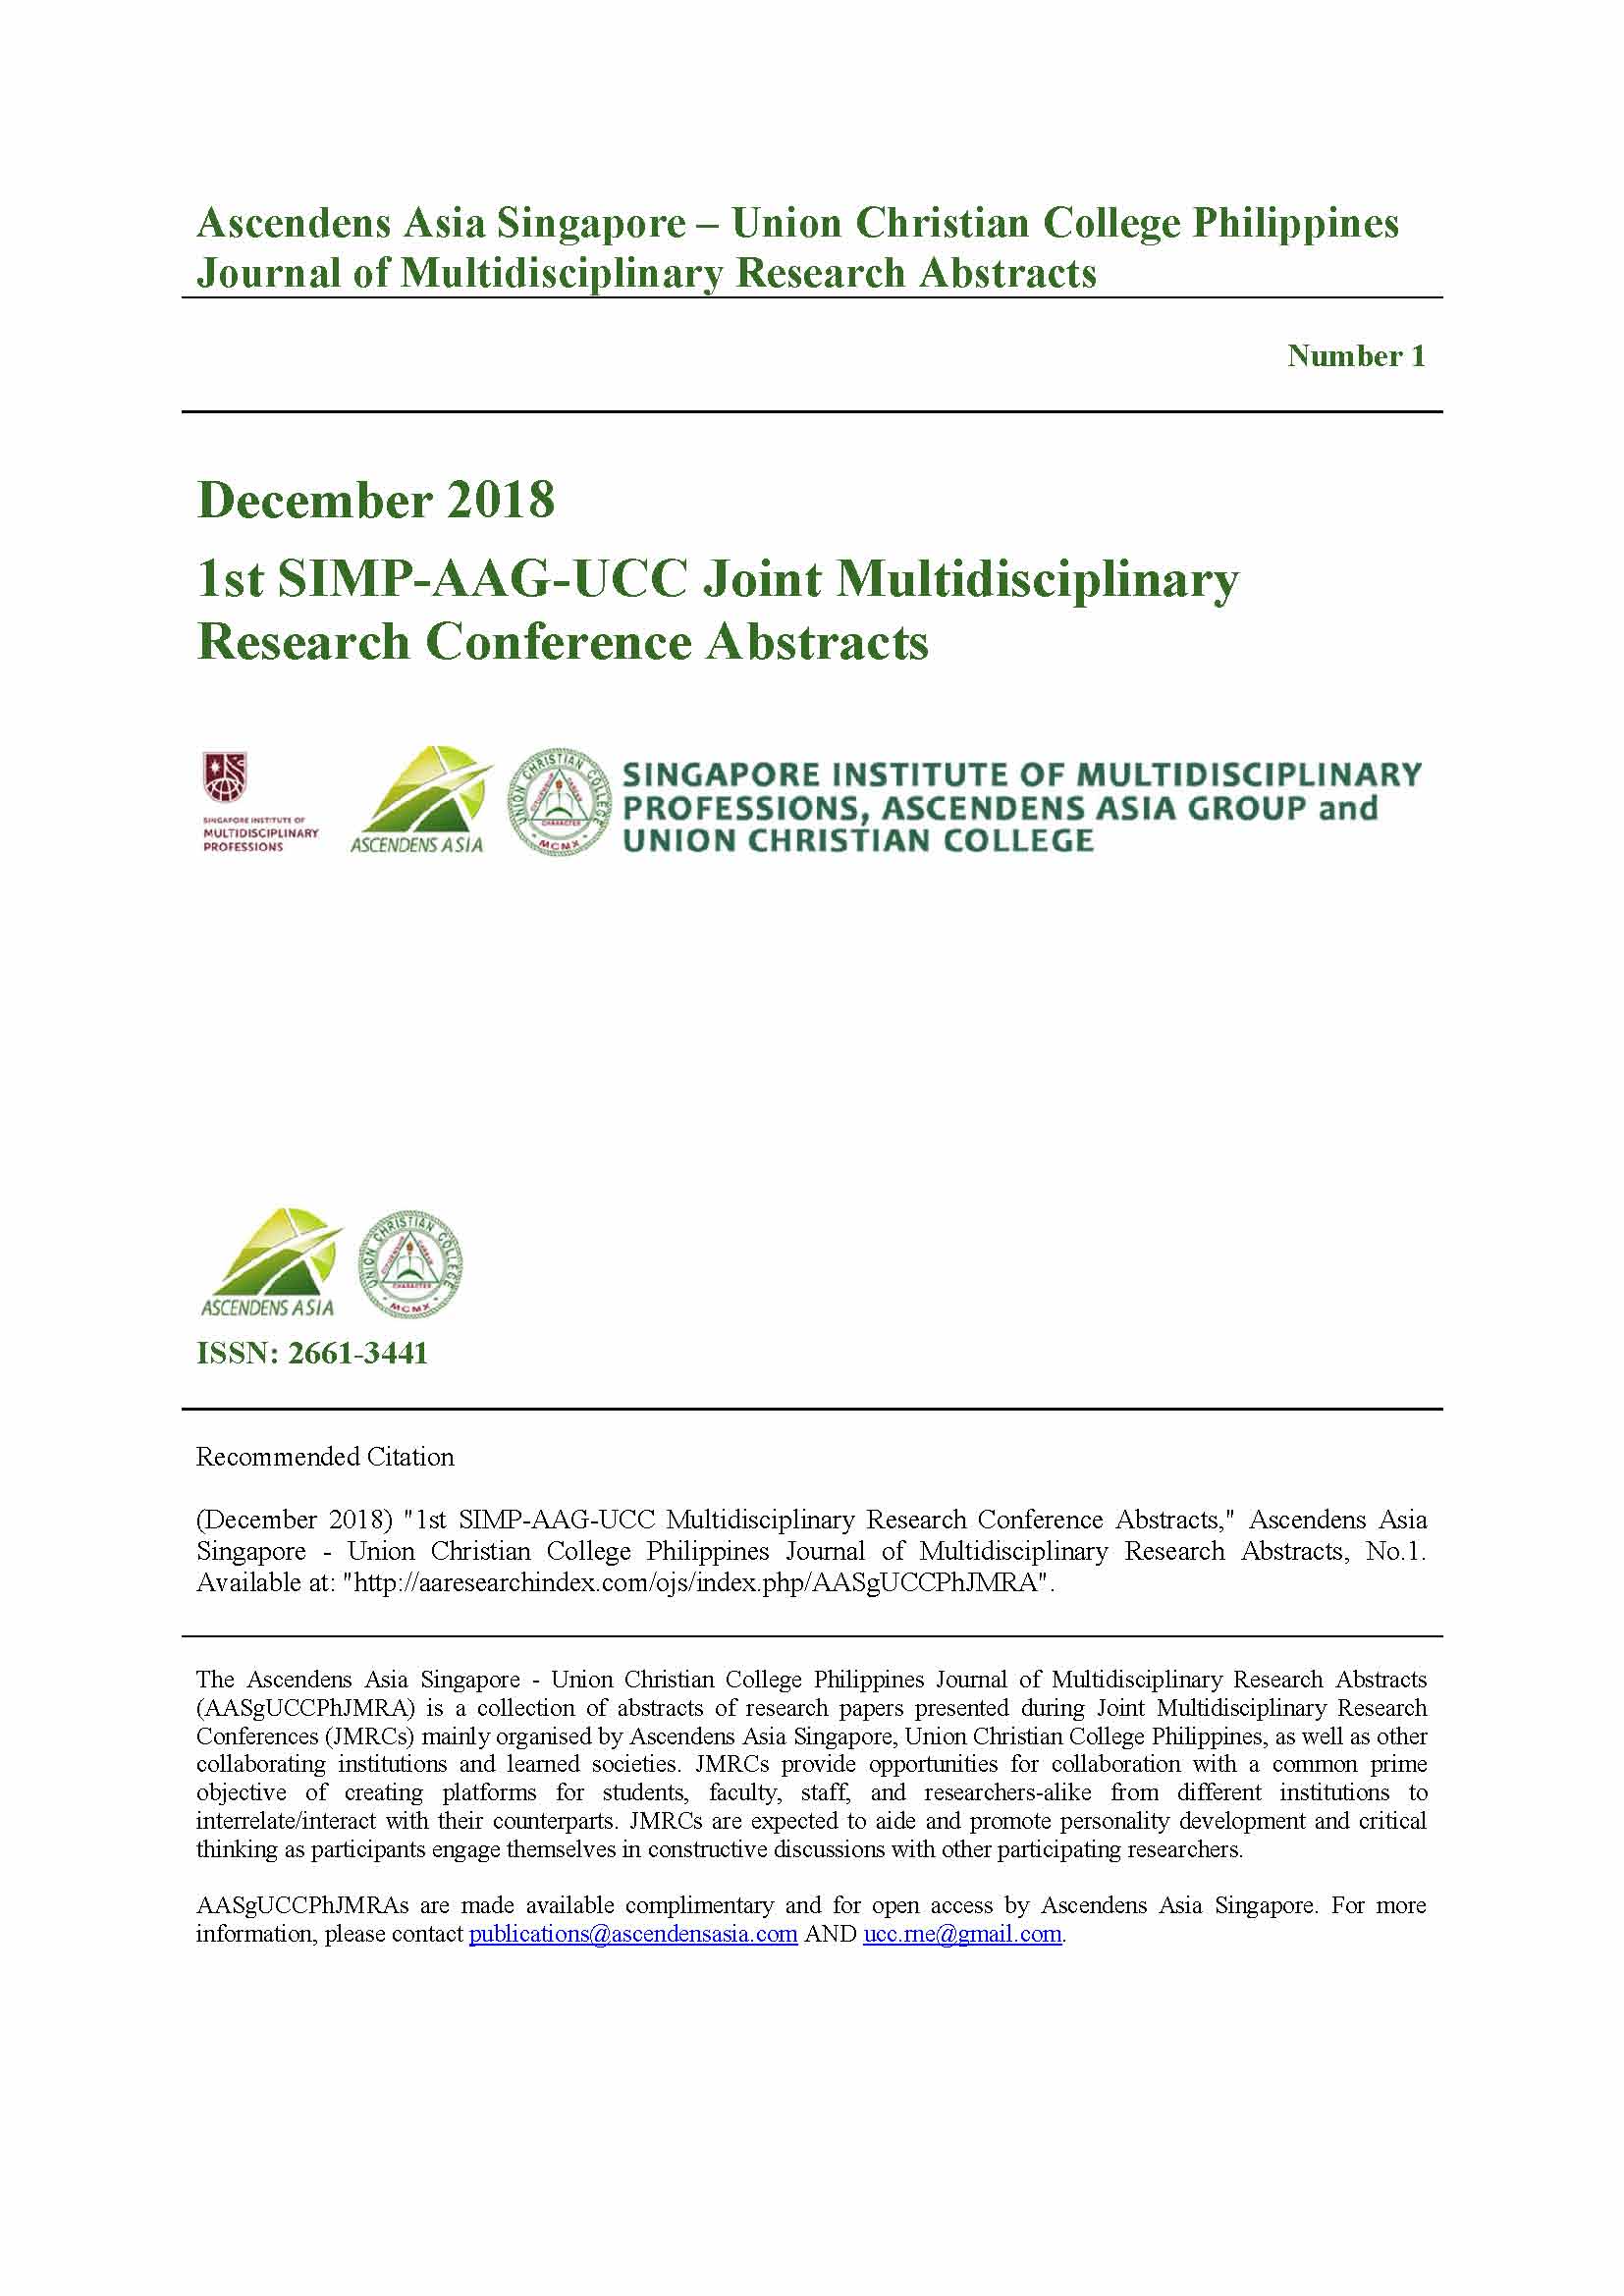 					View Vol. 1 No. 1 (2018): Ascendens Asia Singapore - Union Christian College Philippines Journal of Multidisciplinary Research Abstracts 
				